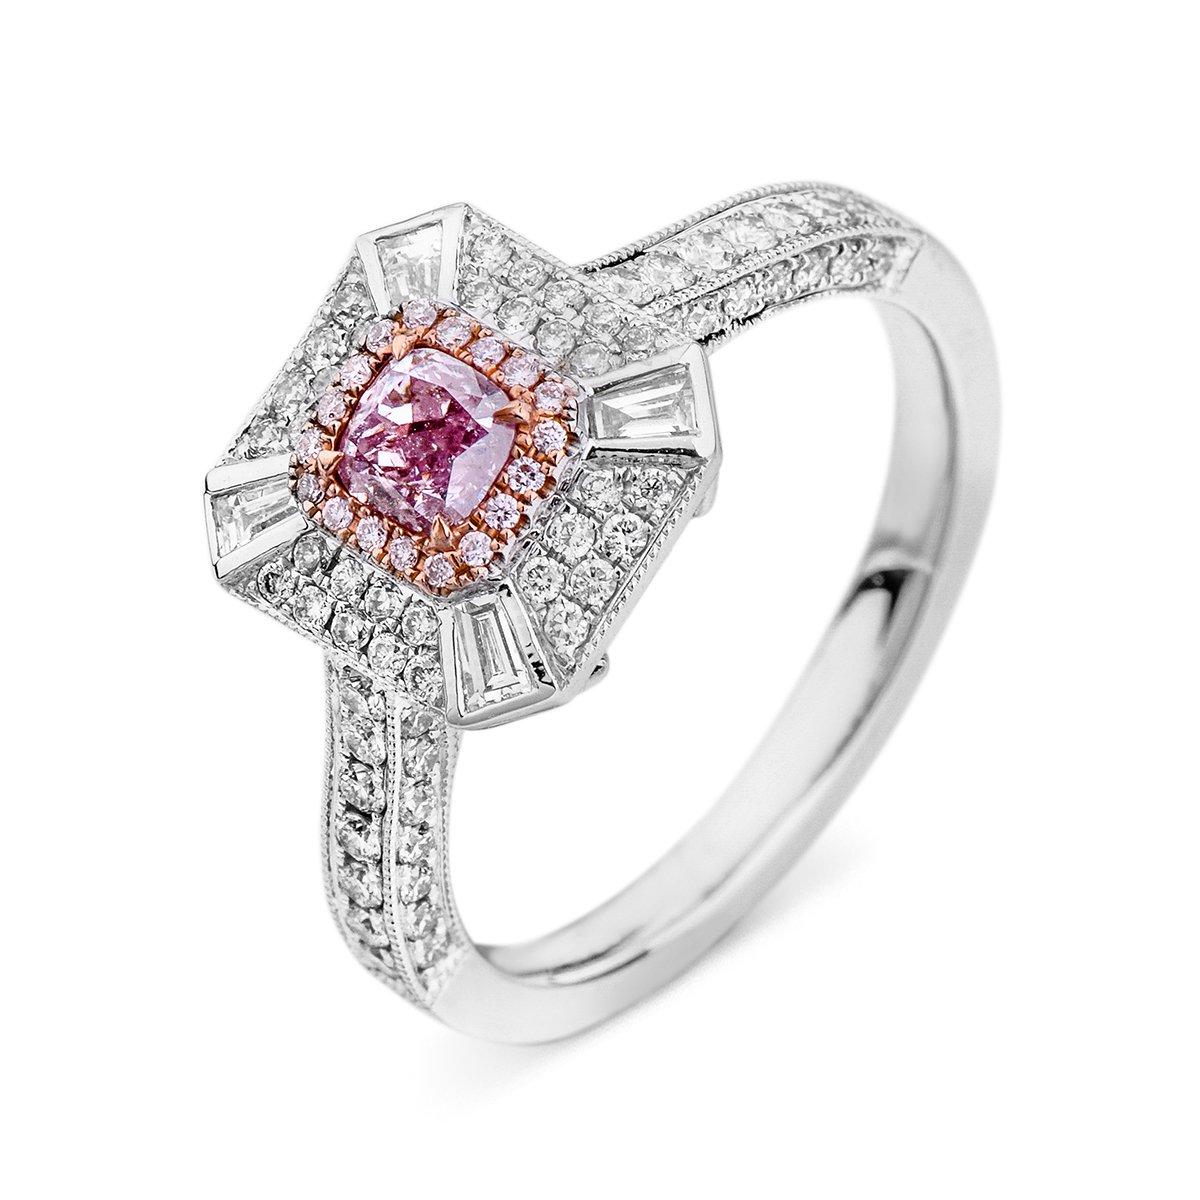 This Fancy Pink Purple Diamond Ring hosts a main 0.33 Carat pink purple diamond, surrounded by white diamonds, together making a total of 0.92 carats. A beautiful, cushion shape, expertly crafted using 18 Karat White Gold. 
The diamonds are all